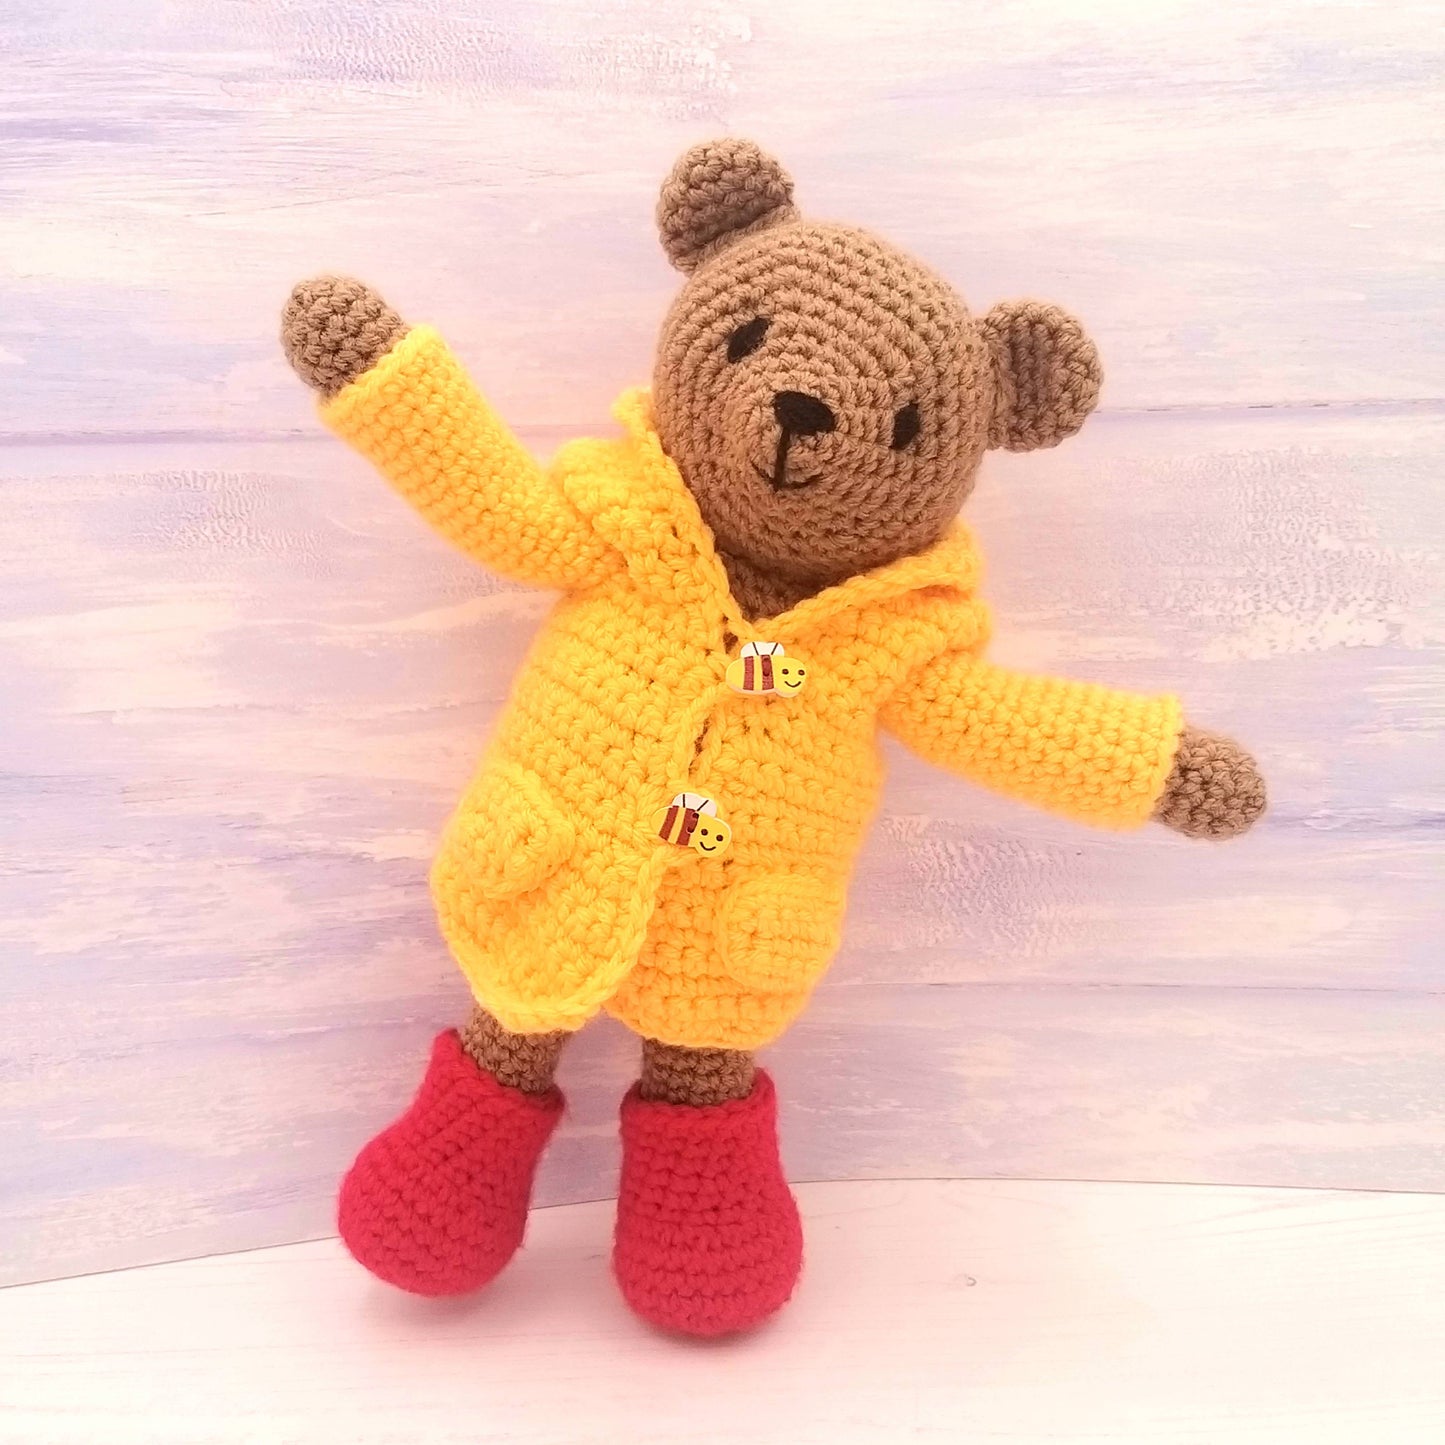 Remake kits -  remake your favourite Woolly Wonderful!